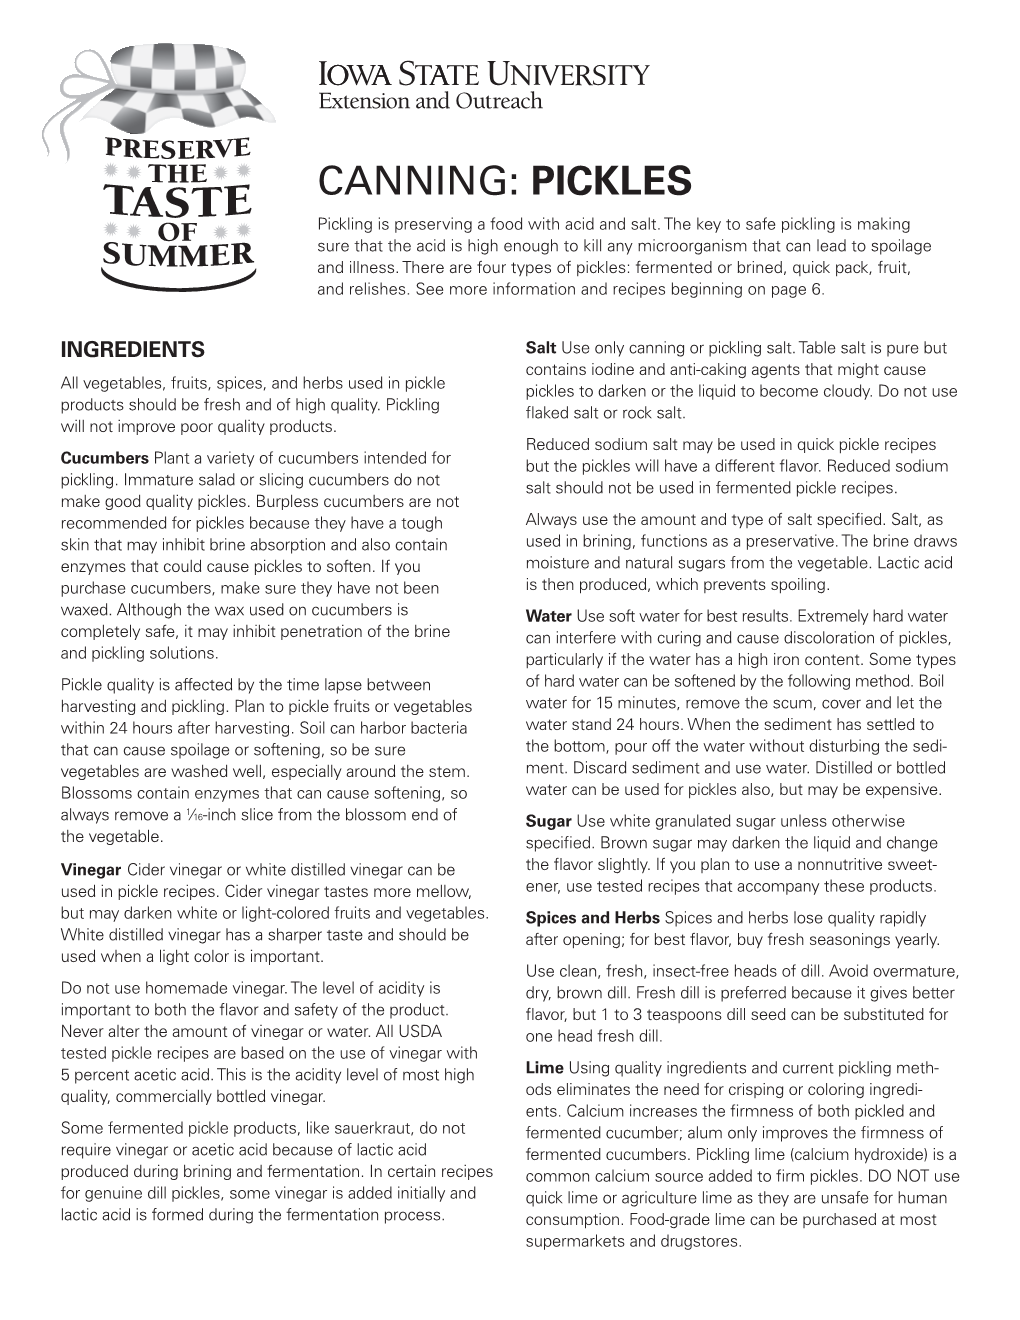 CANNING: PICKLES Pickling Is Preserving a Food with Acid and Salt